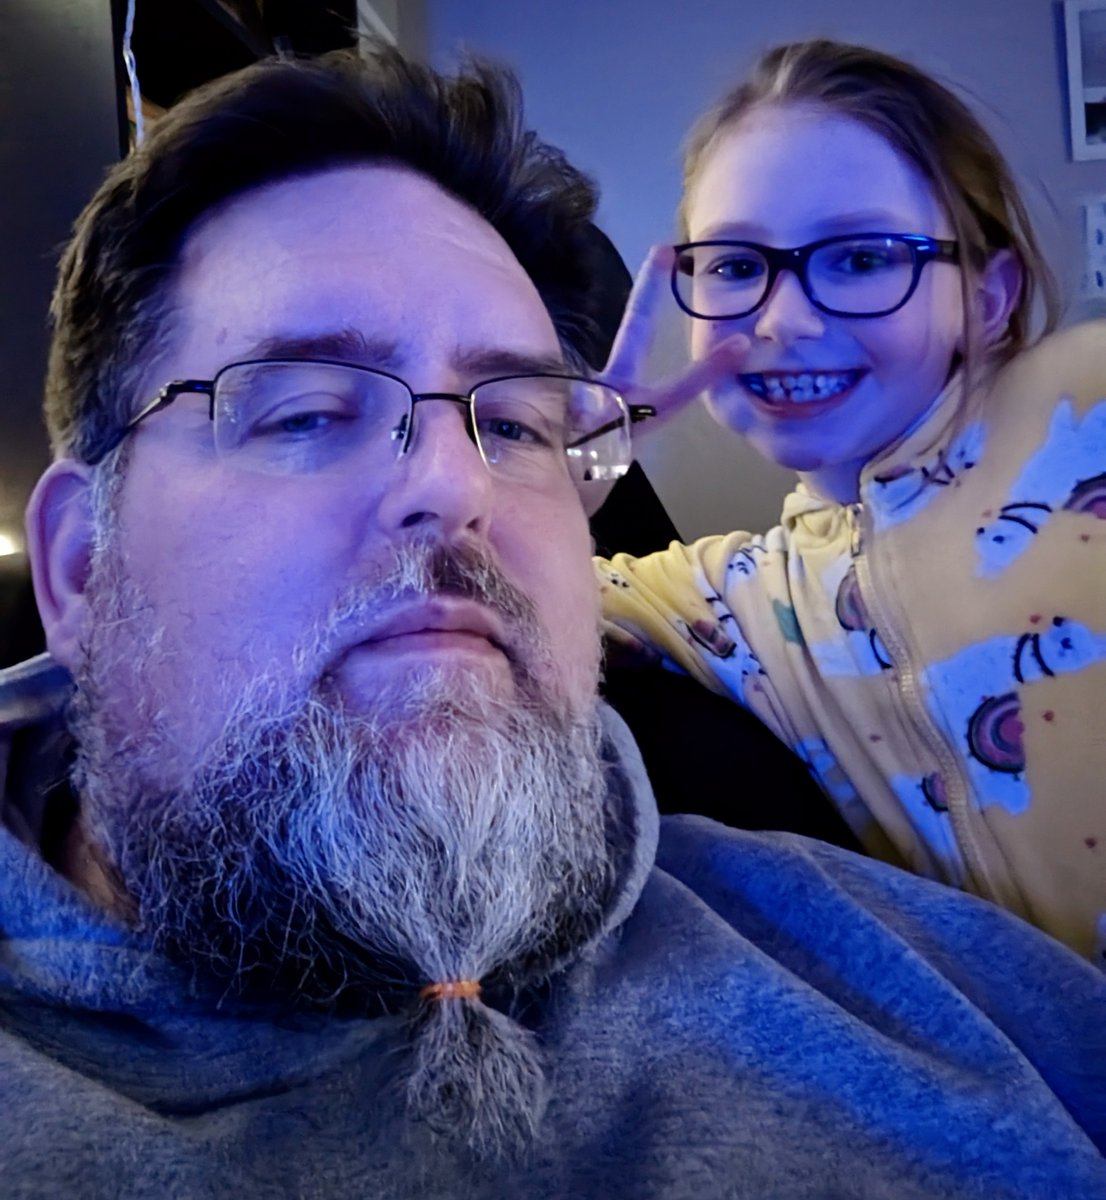 Finally reach 'beard tie' length.
Or as my daughter puts it: beard pony tail.

You don't resist or argue when your daughter wants to do this.
cc: @JeremySiers